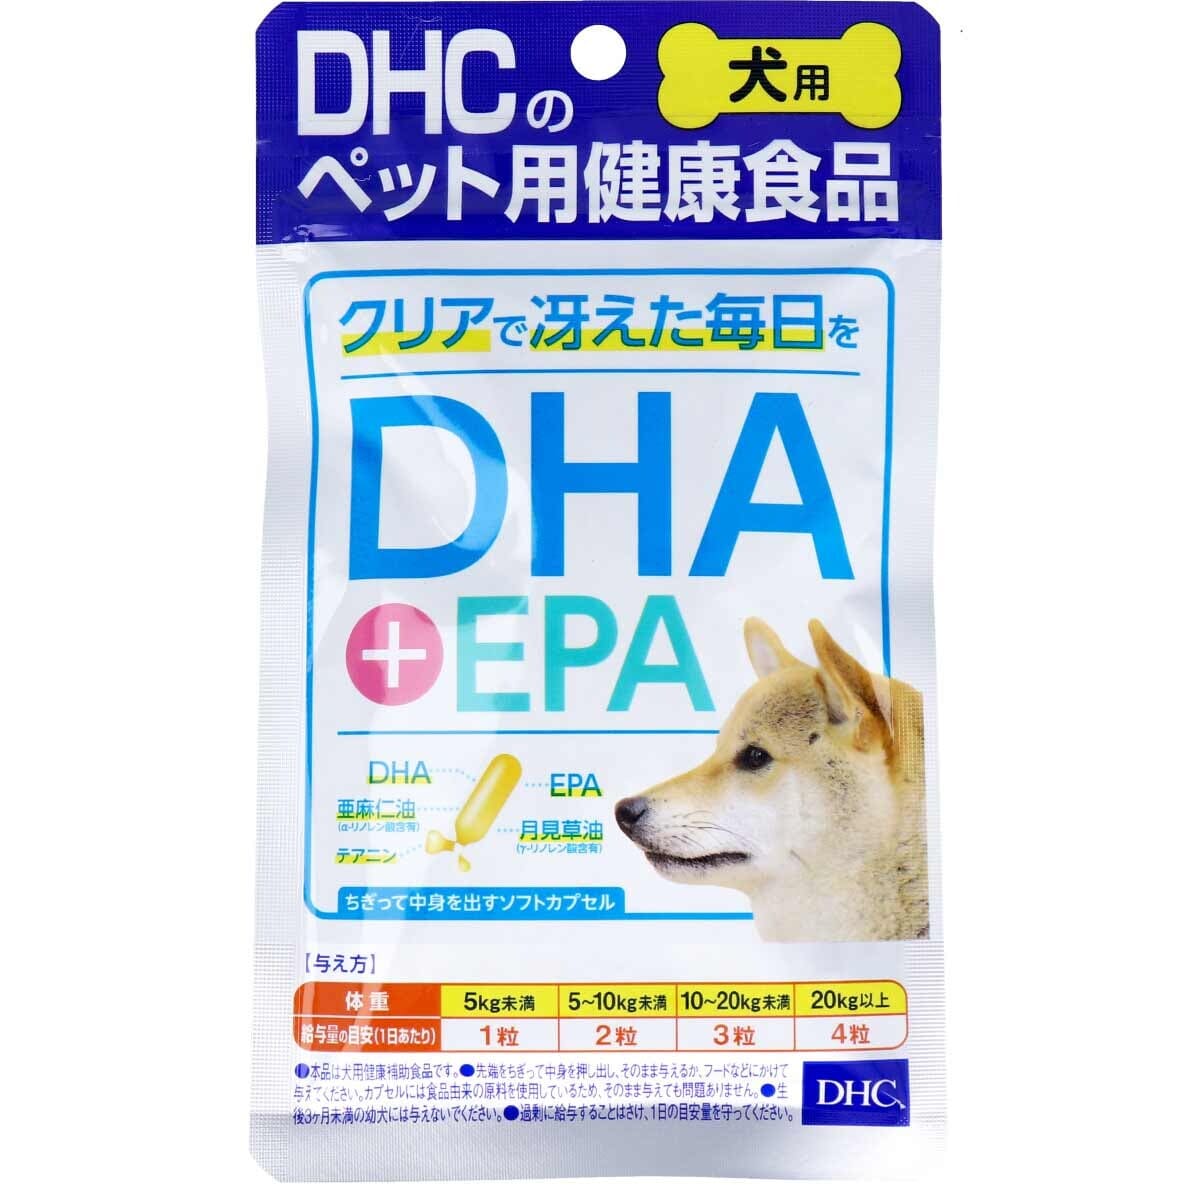 DHC - DHA+EPA Health Food Supplement for Pet Dogs (60 Capsules) -  Pet Dog Supplements  Durio.sg